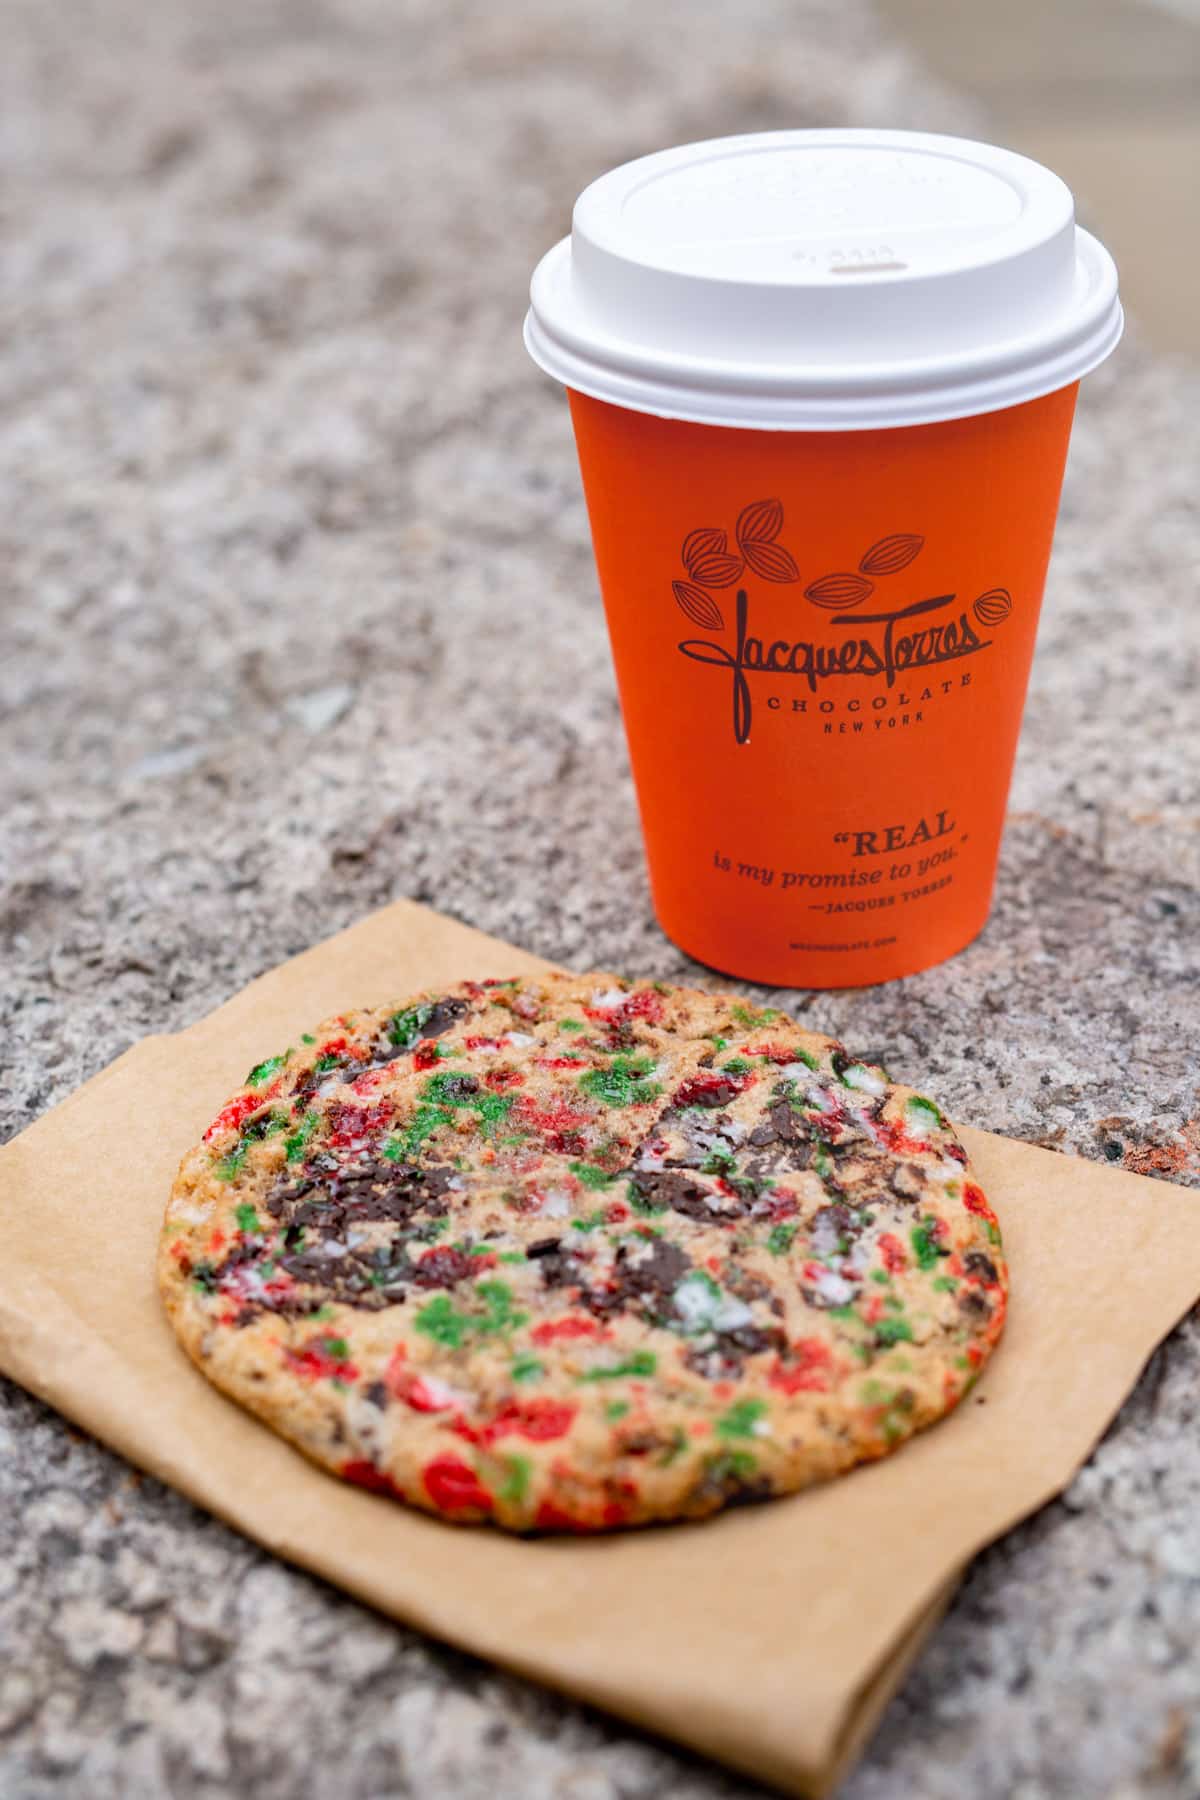 Jacques Torres Hot Chocolate and peppermint chocolate chip cookie